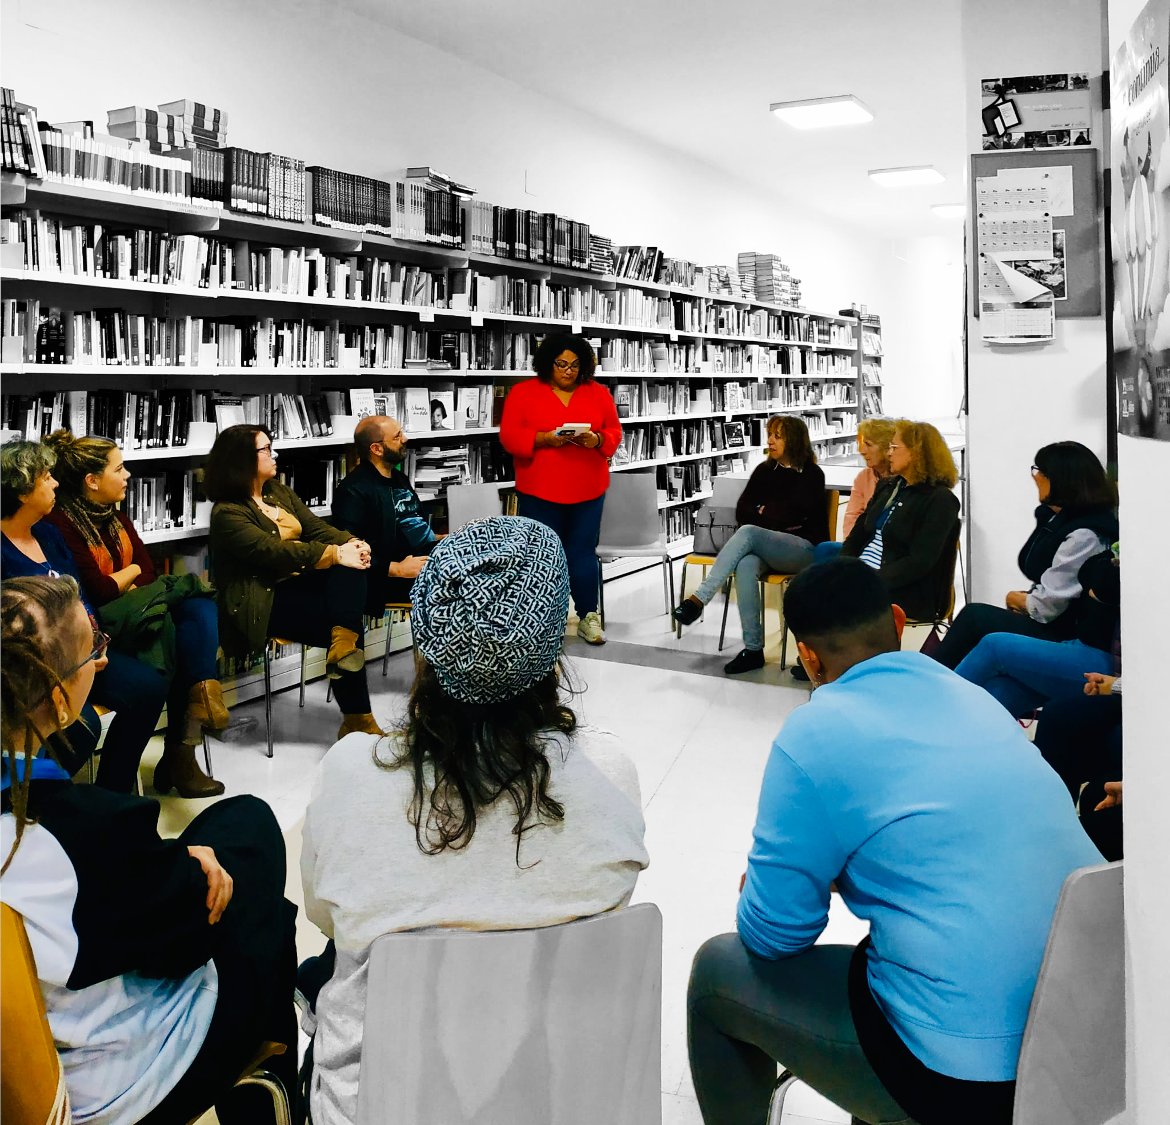 Strengthening community ties in diverse libraries is a challenge. Through the library, a participant in #TheEuropeChallenge involved migrants in decision-making, enhancing integration. Donate to us on #GivingTuesday to help us support projects like this: bit.ly/47FEerx